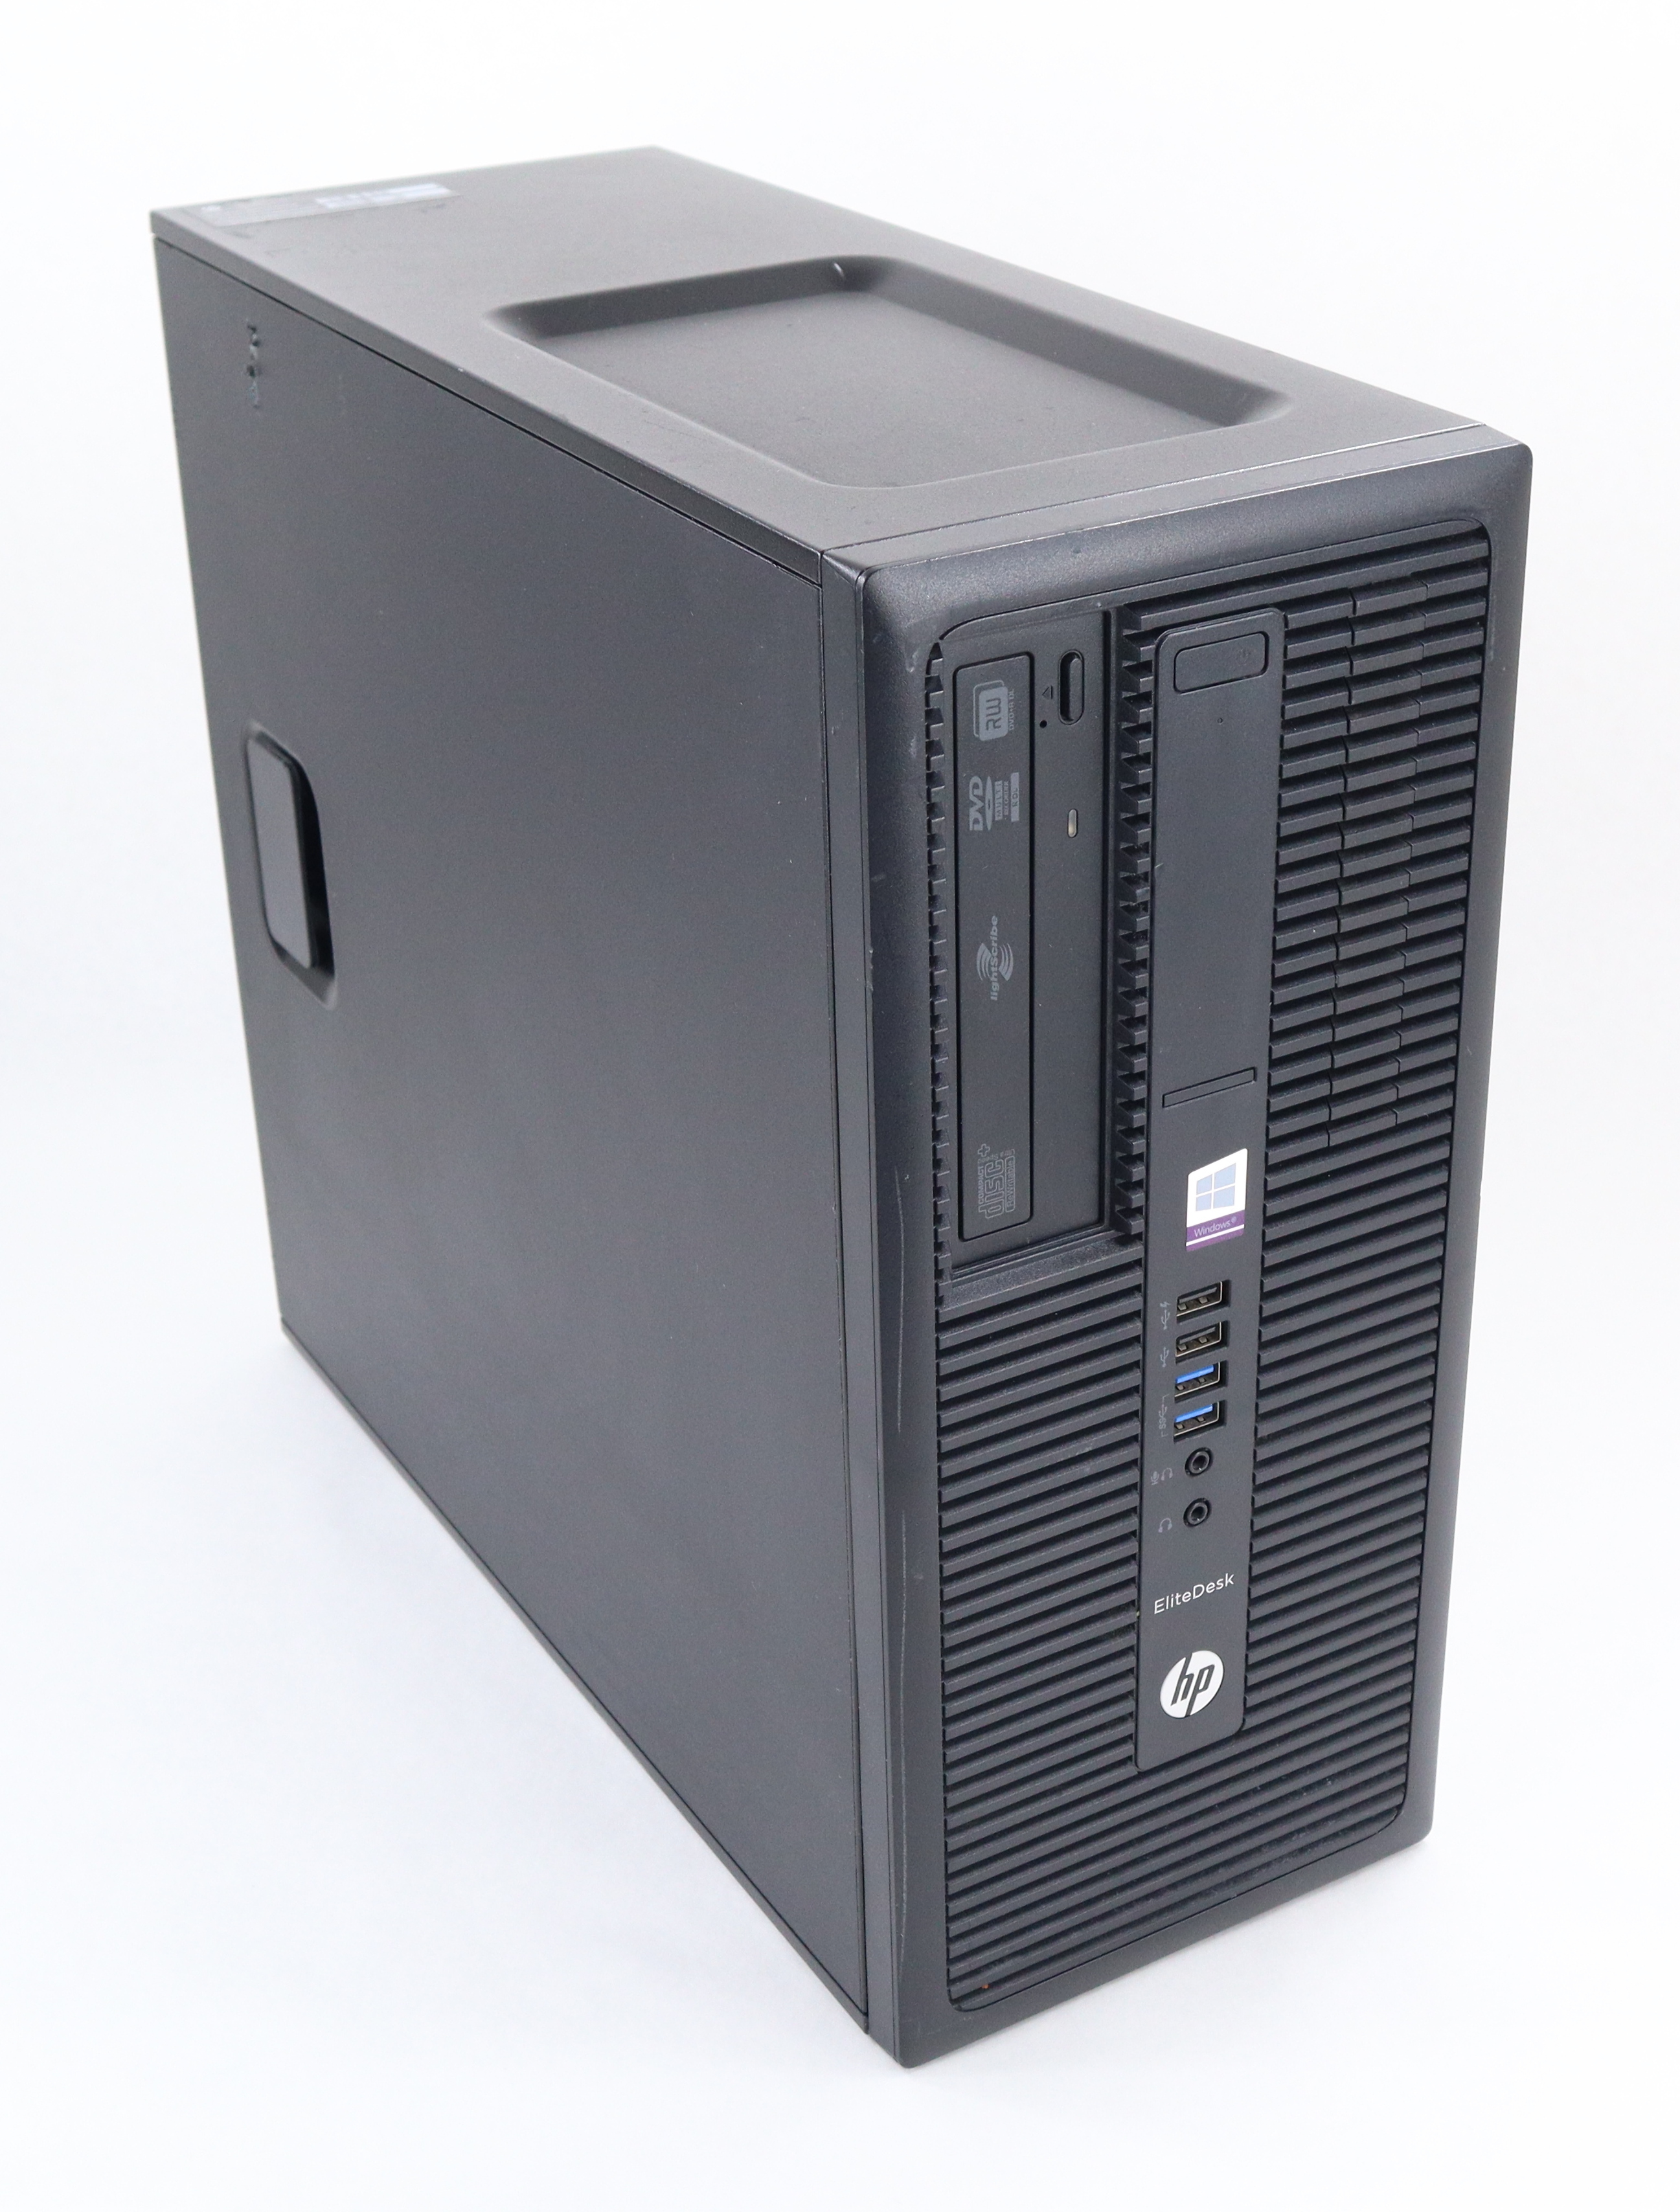 HP EliteDesk 800 Gen2 Tower PC i5-6500 3.2GHz RAM 16GB HDD 1TB Win10 V8W56UP#ABA - Click Image to Close